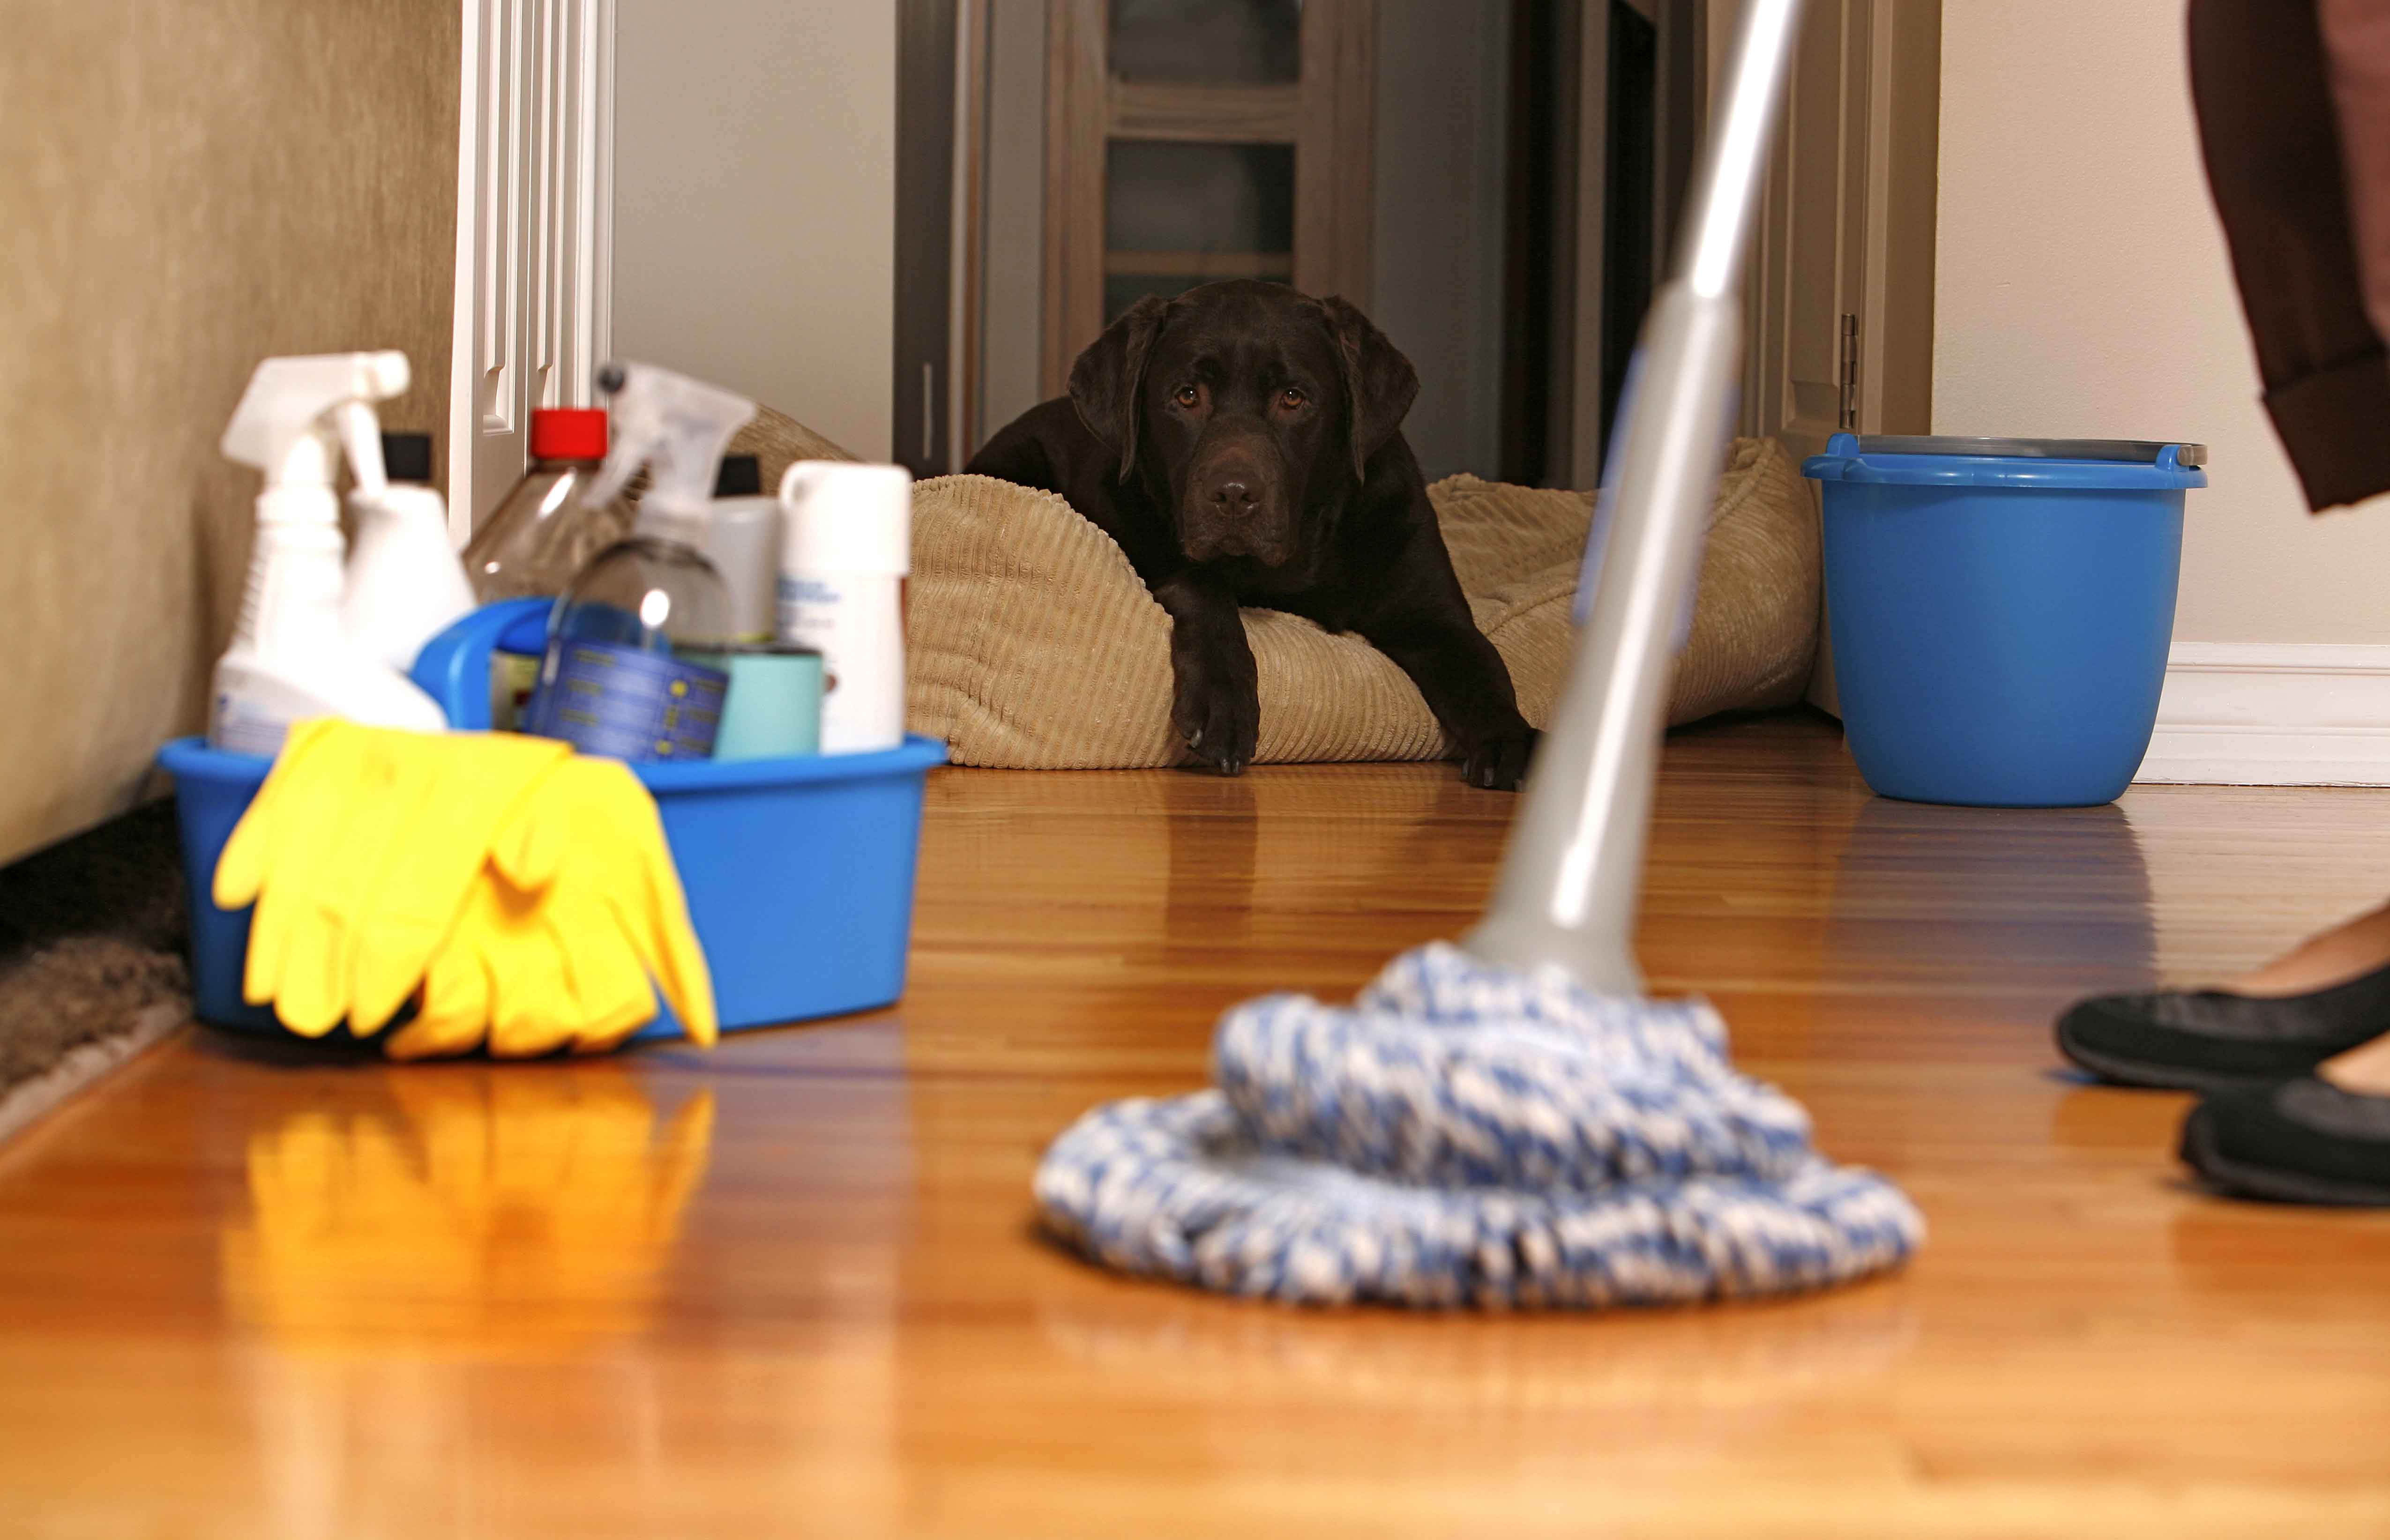 Top 10 Cleaning Tips From the Pros1